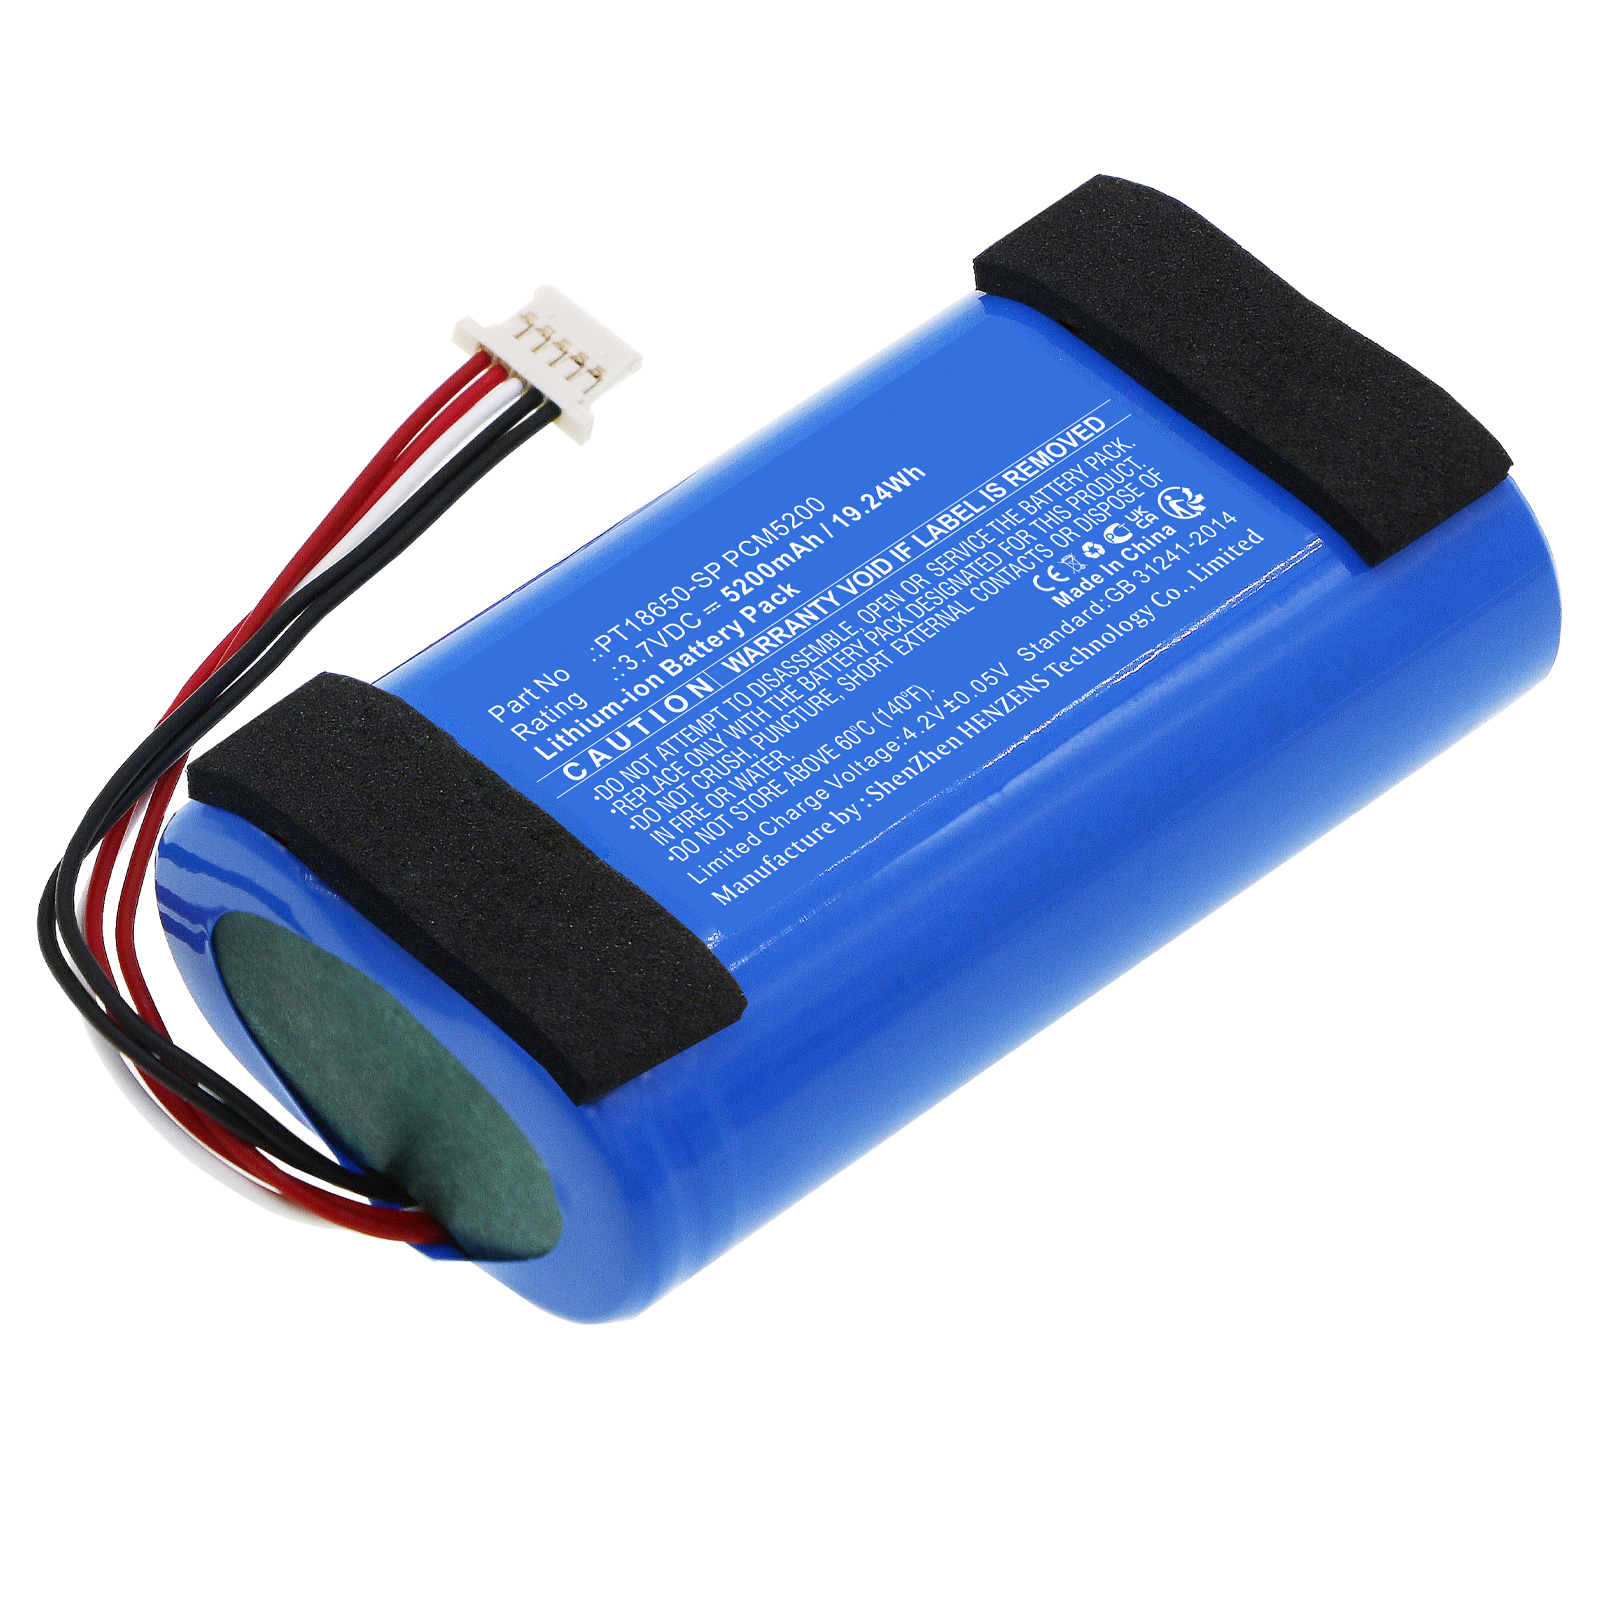 Synergy Digital Baby Monitor Battery, Compatible with Eufy PT18650-SP PCM5200 Baby Monitor Battery (Li-ion, 3.7V, 5200mAh)